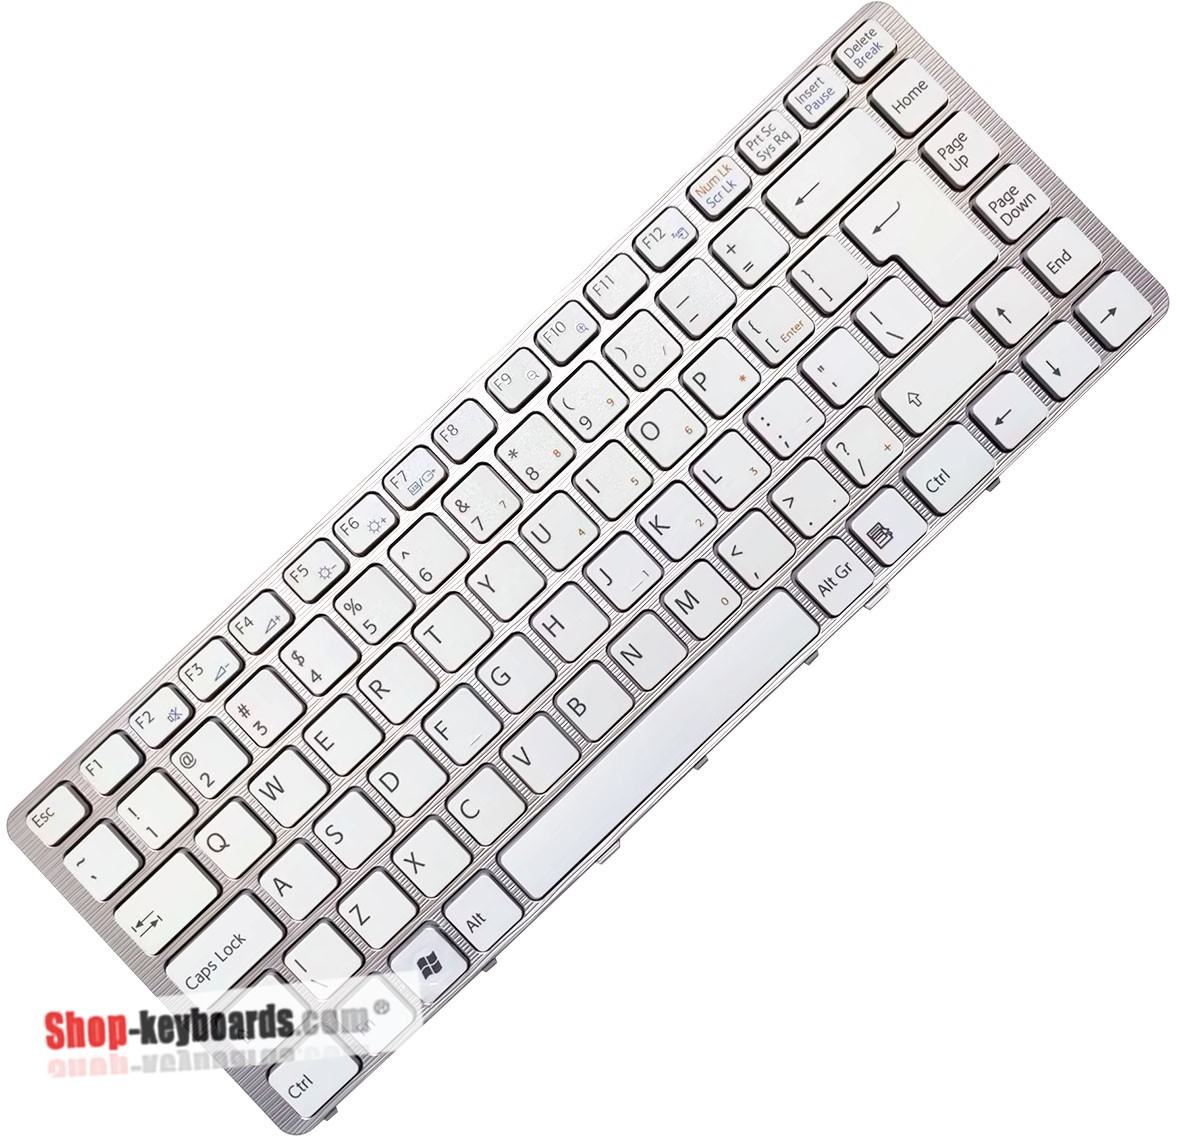 Sony Vaio VGN-NW225F/S Keyboard replacement